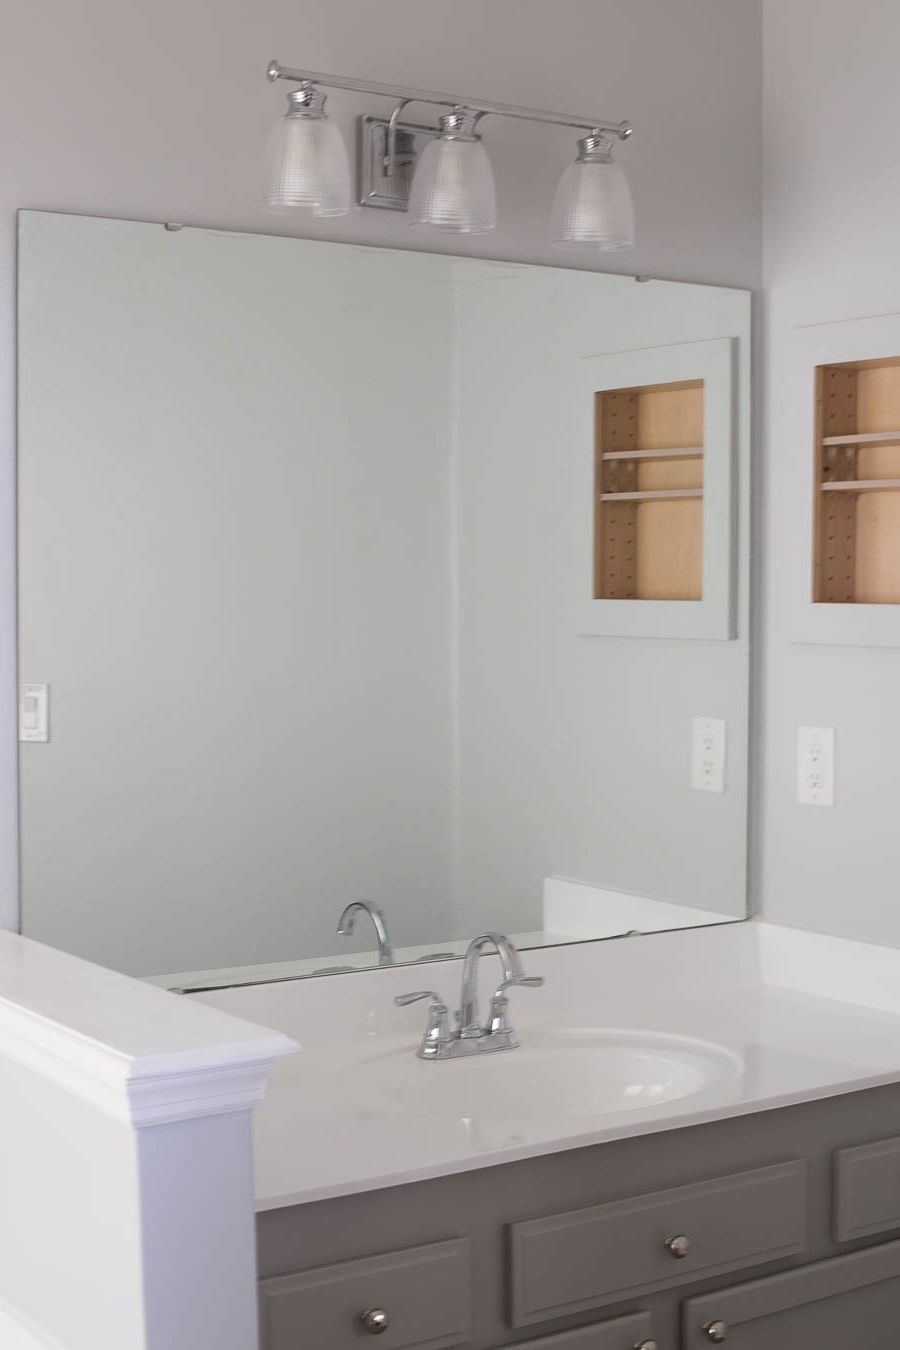 Framed Bathroom Mirrors Is Cool Beveled Wall Mirror Is Cool Wood In Well Known Framing Bathroom Wall Mirrors (View 7 of 20)